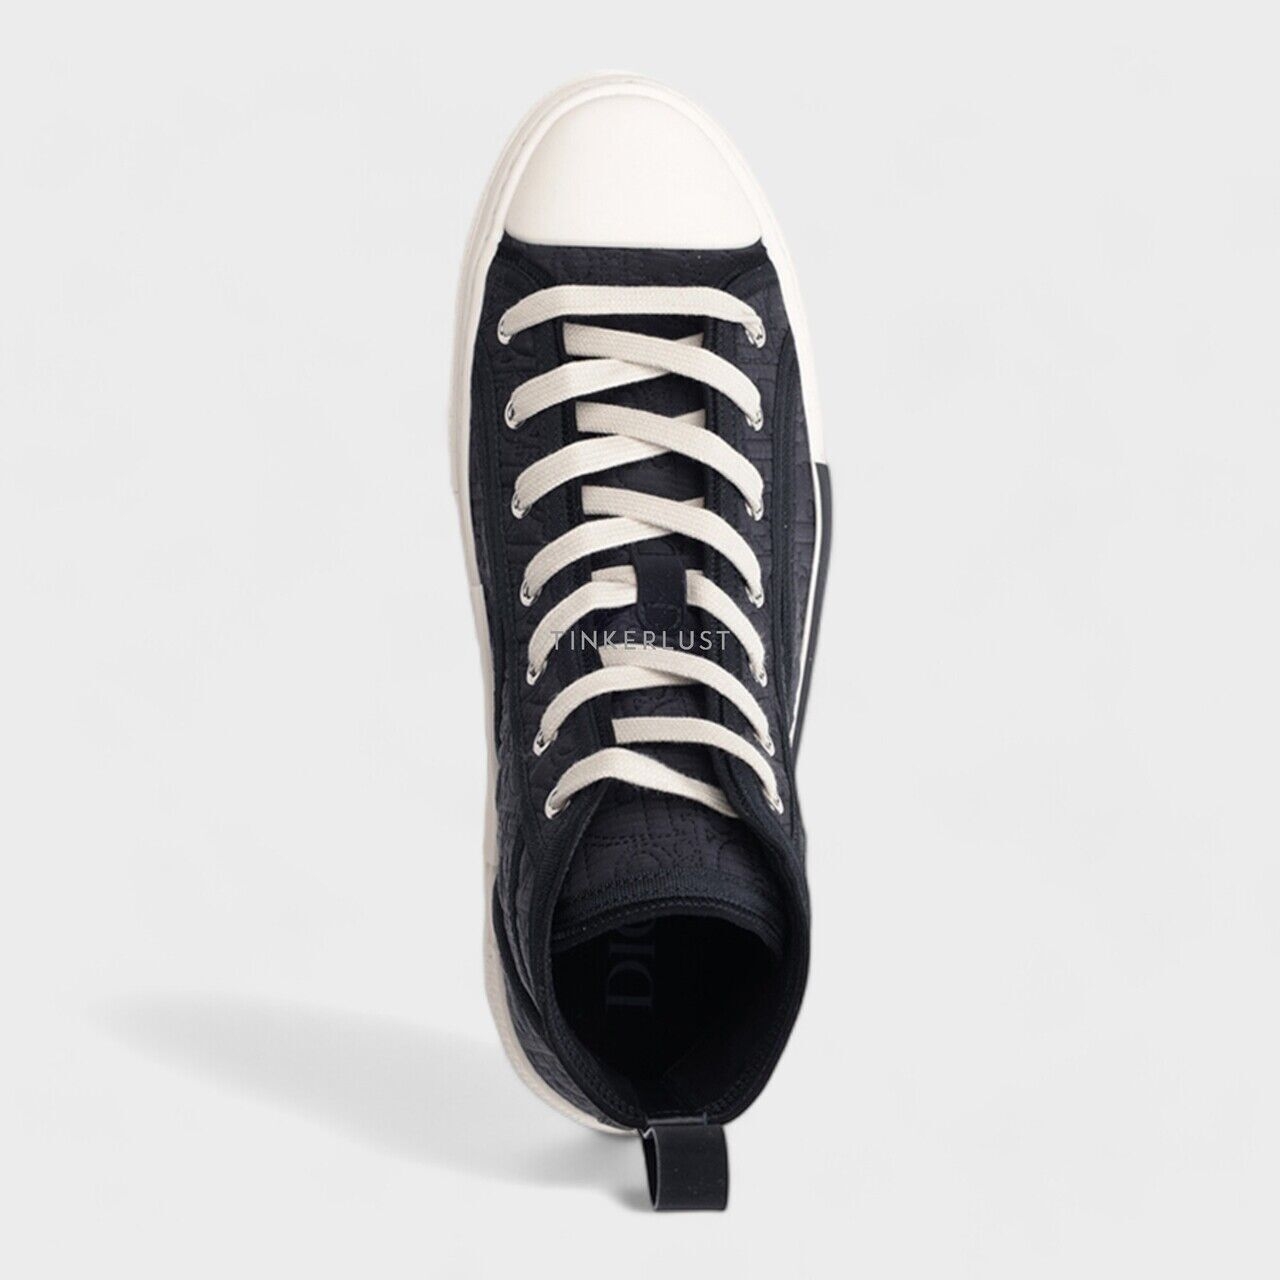 Christian Dior Oblique Kumo High-Top Black/White Sneakers